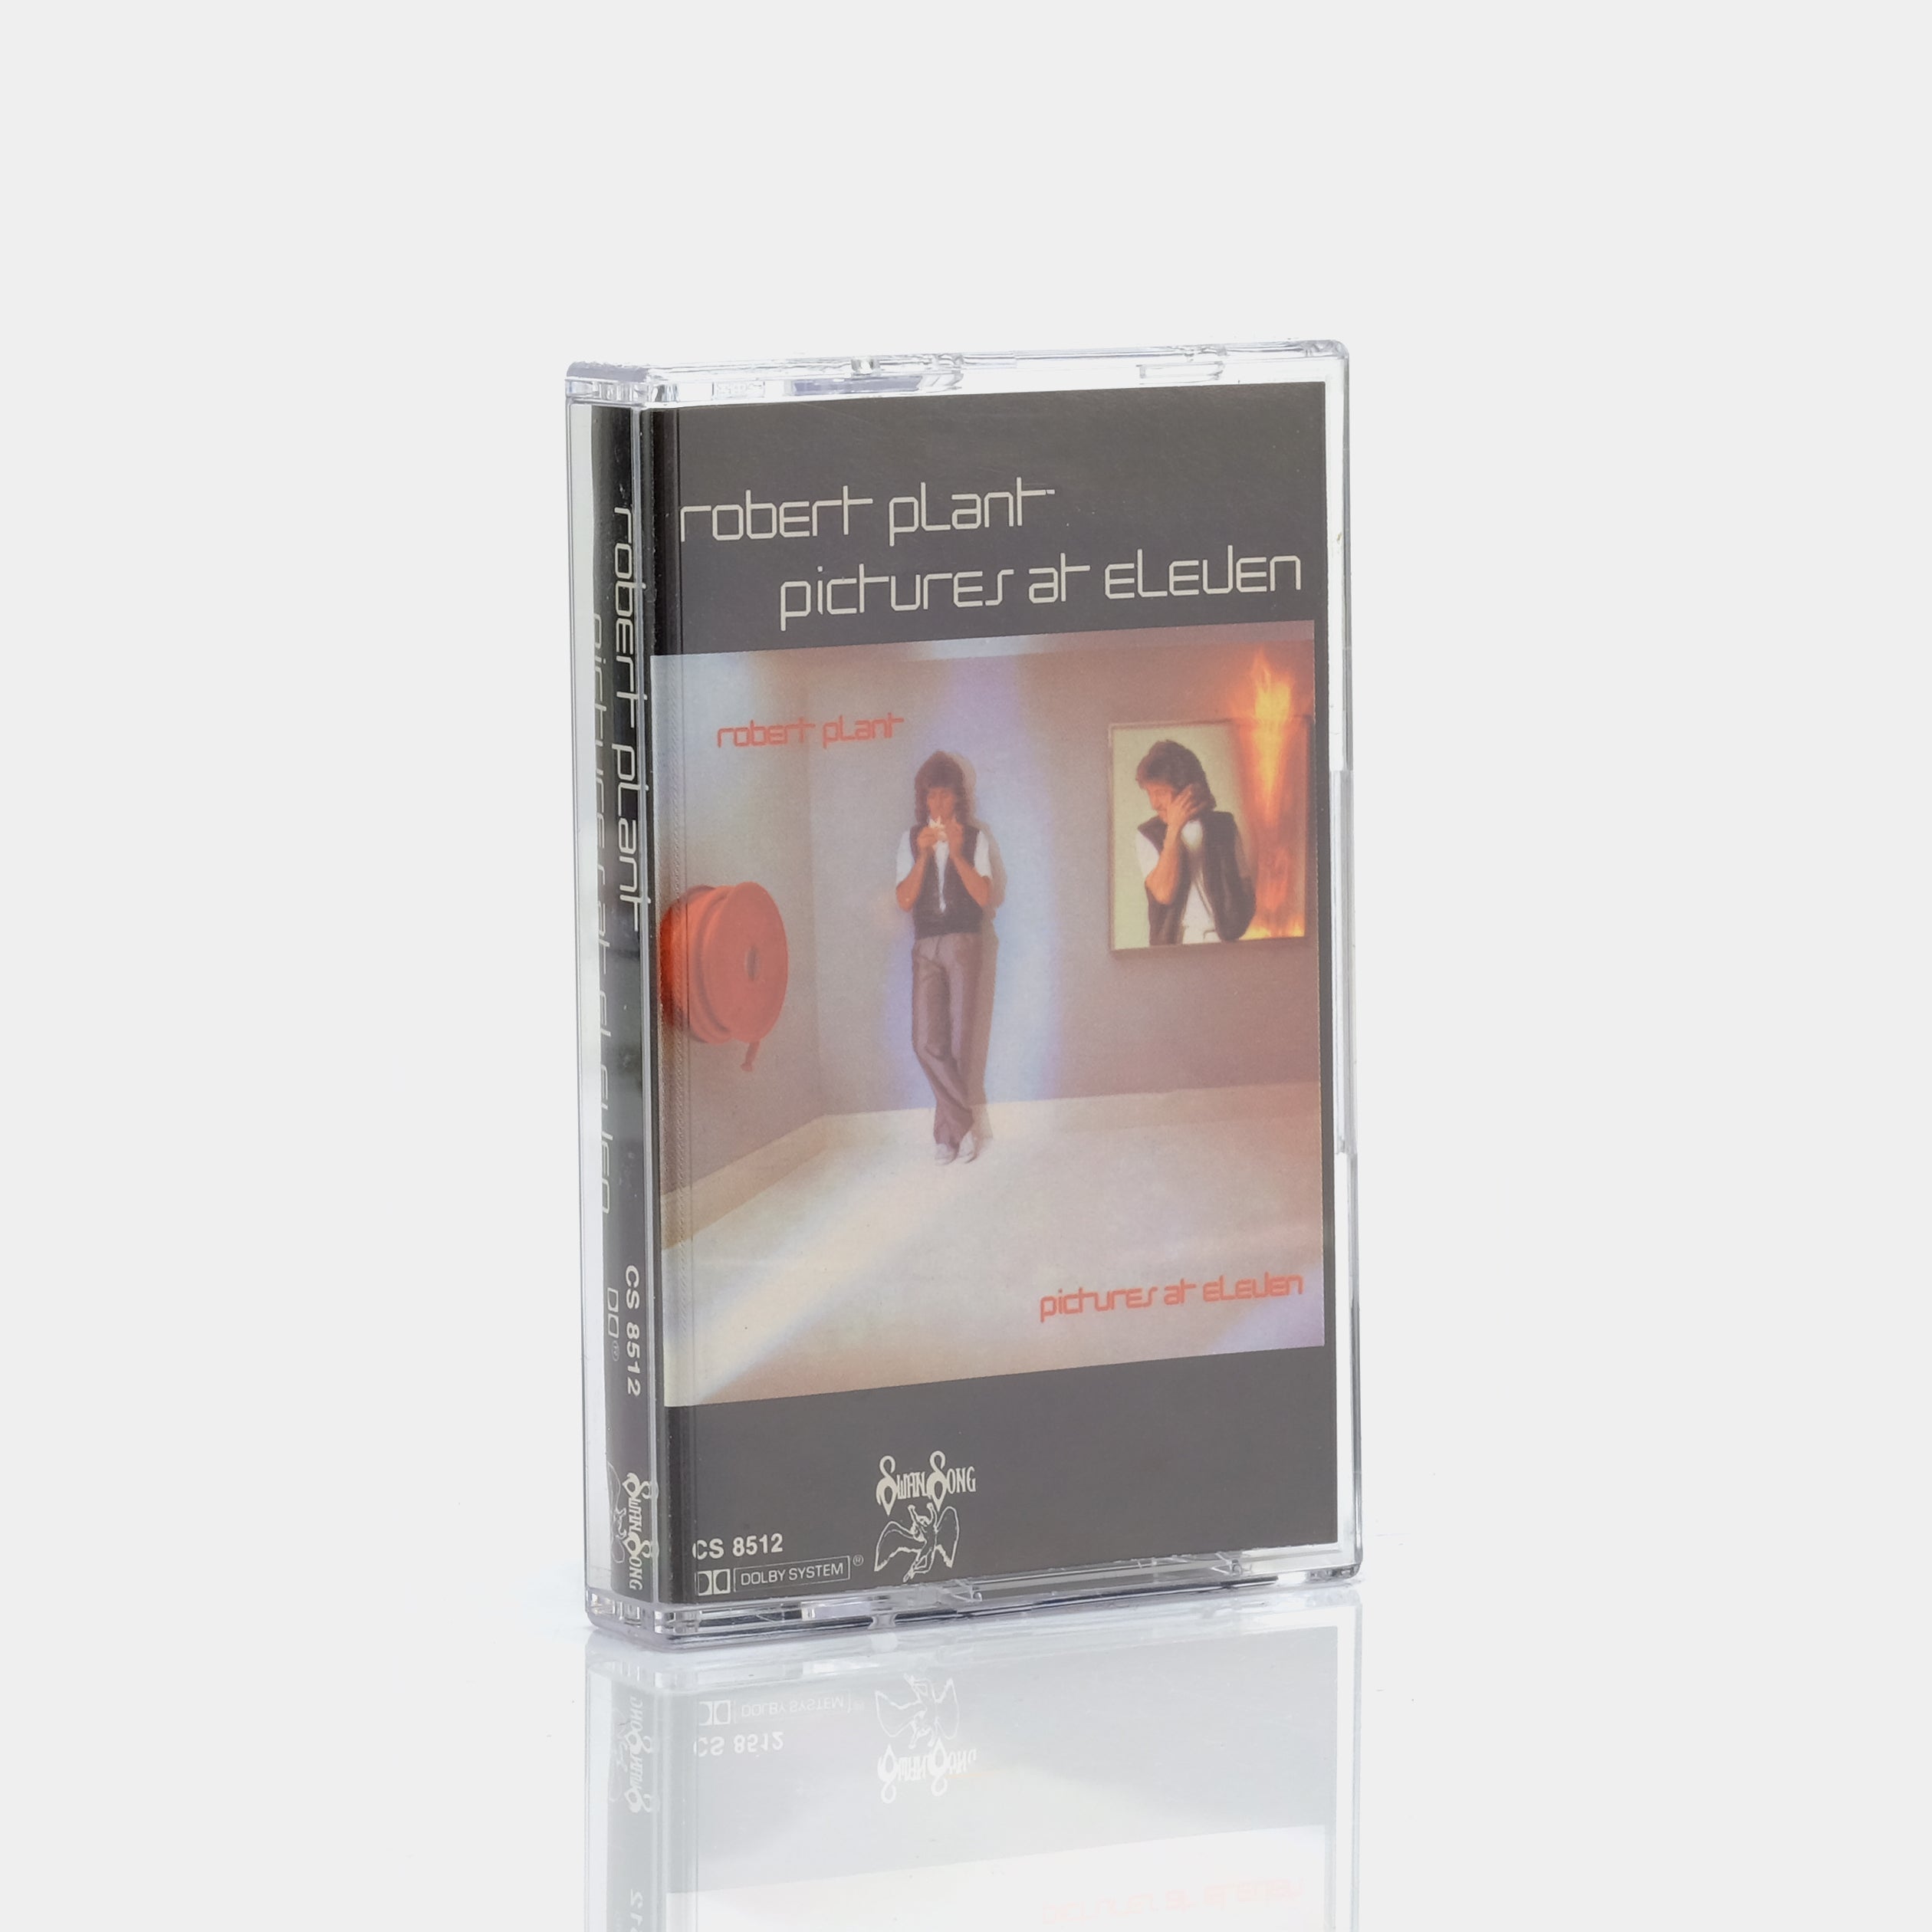 Robert Plant - Pictures At Eleven Cassette Tape